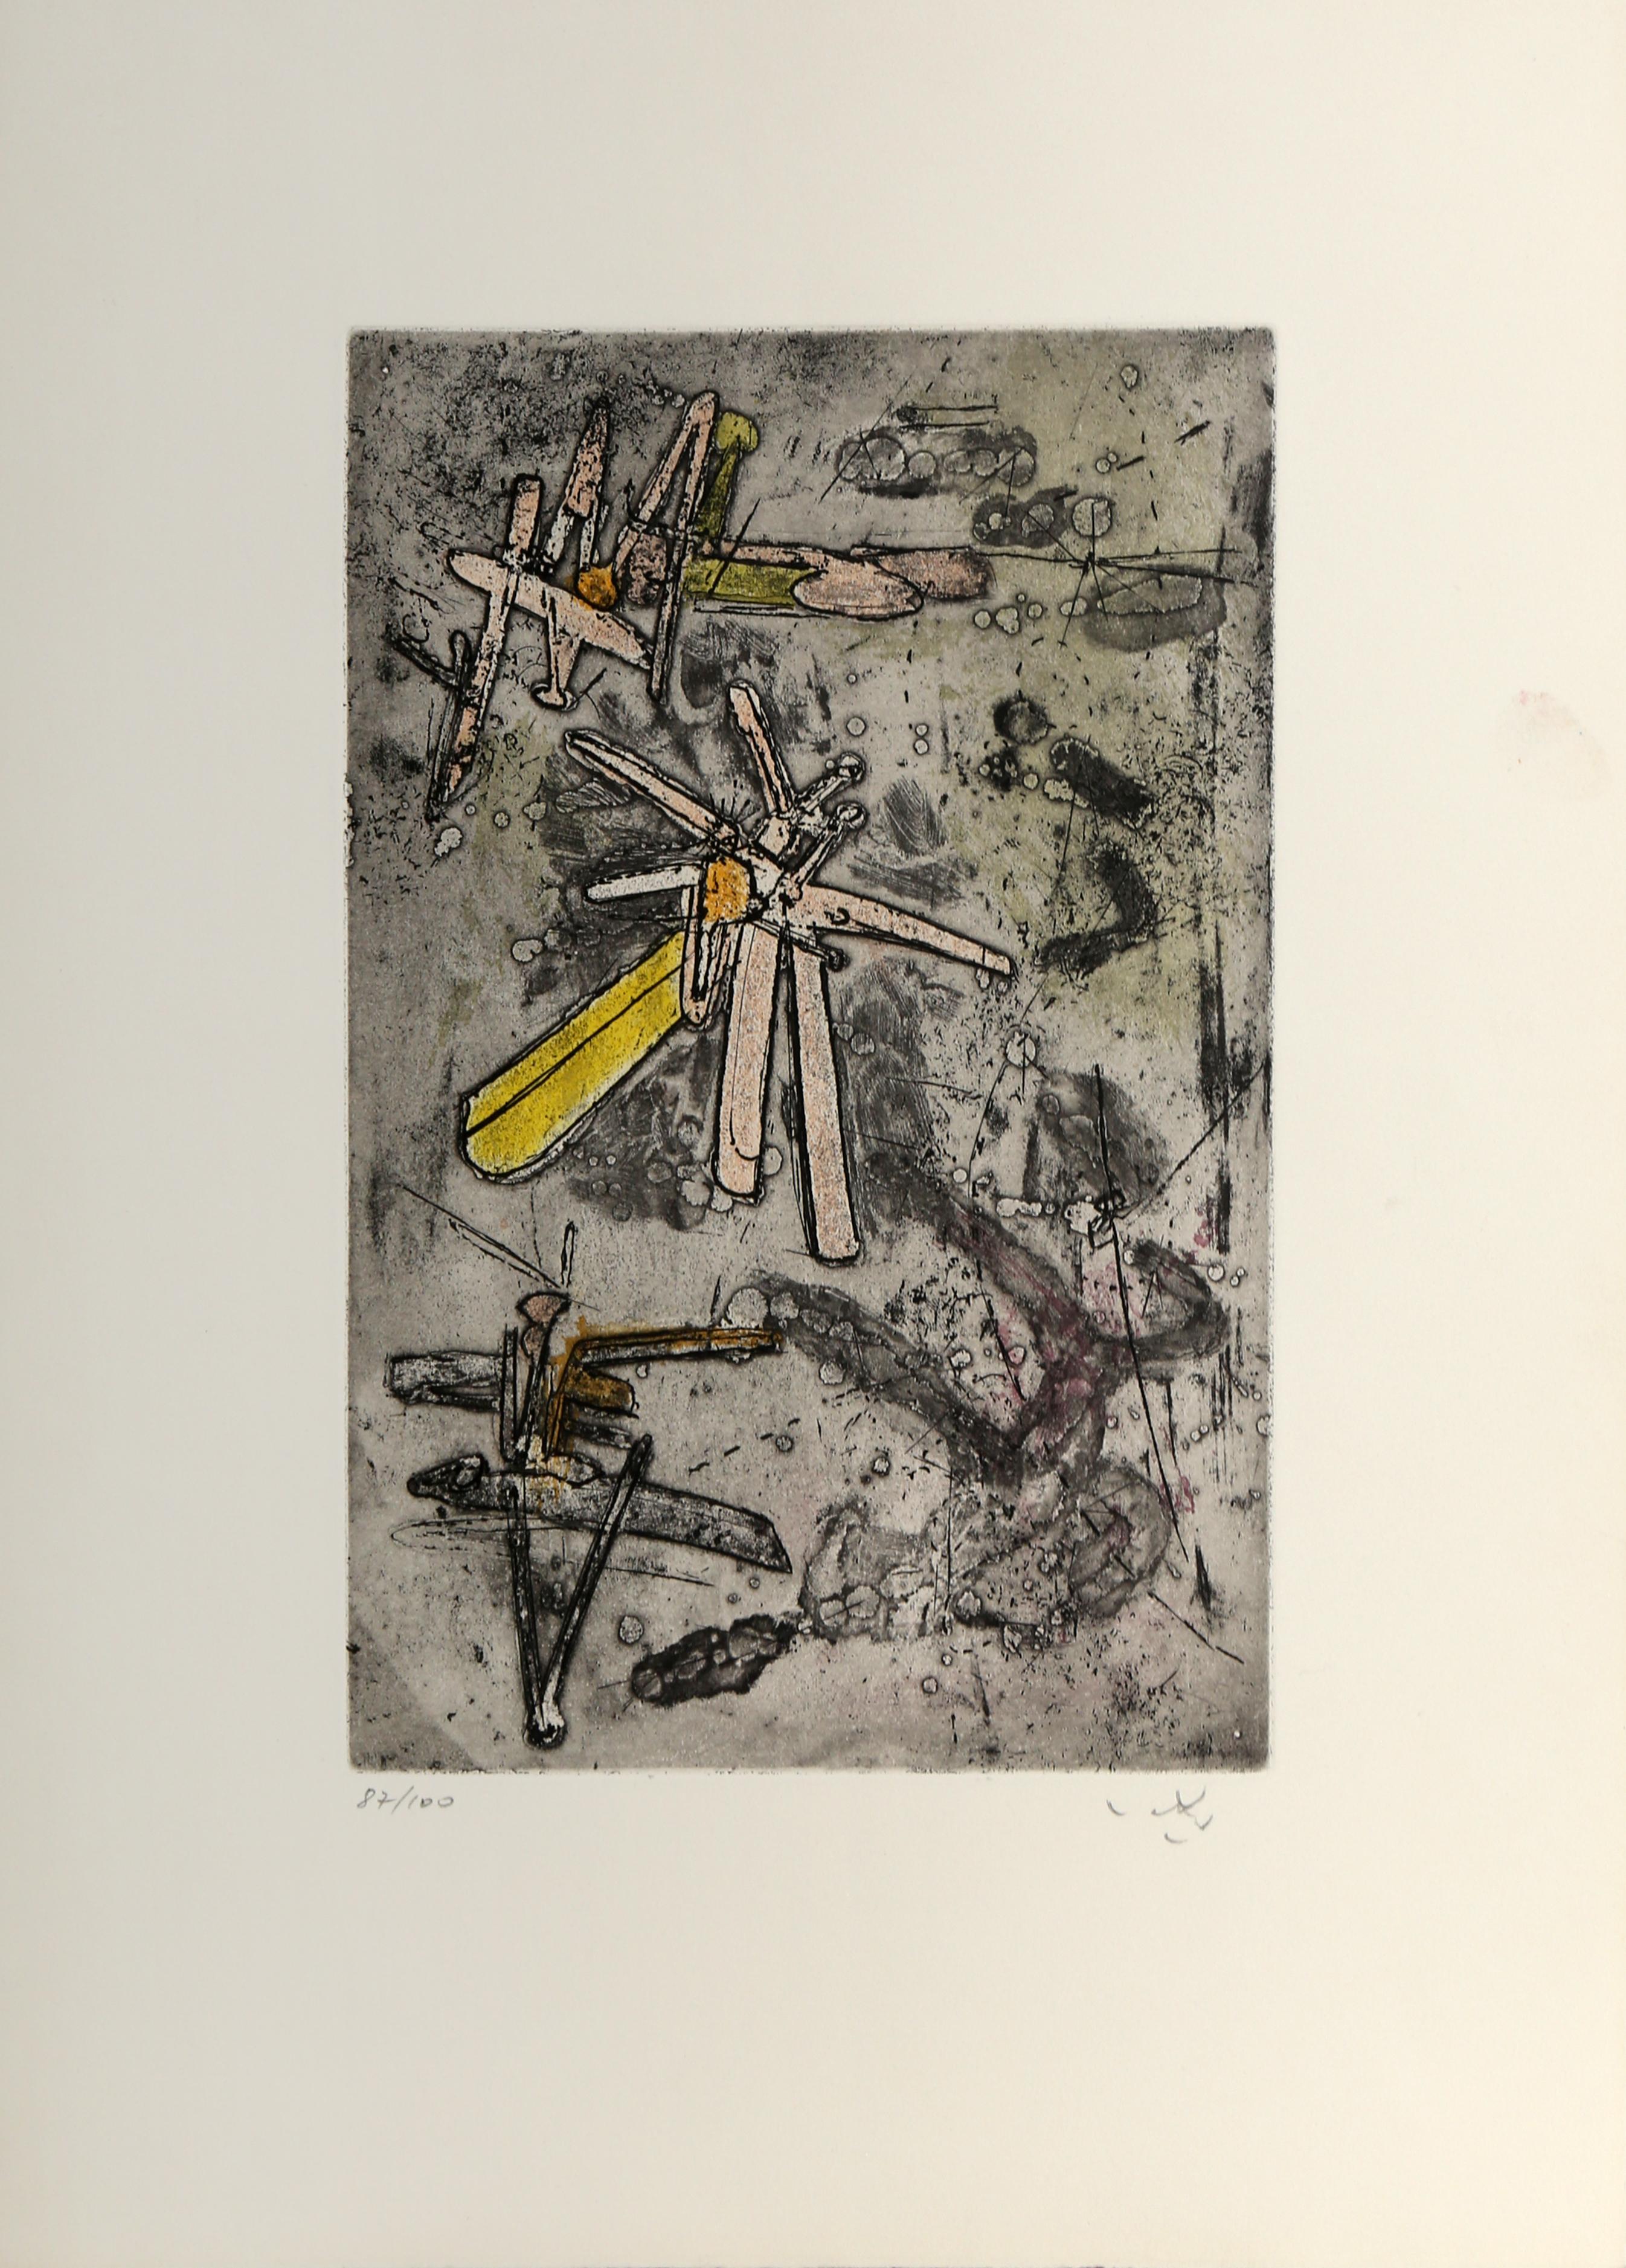 Roberto Matta is a Chilean artist who focused on abstract painting. Matta regularly explored themes of global war and conflict through his art and used messy, chaotic methods to bring subjects to life. This etching is an edition of 100 and is signed